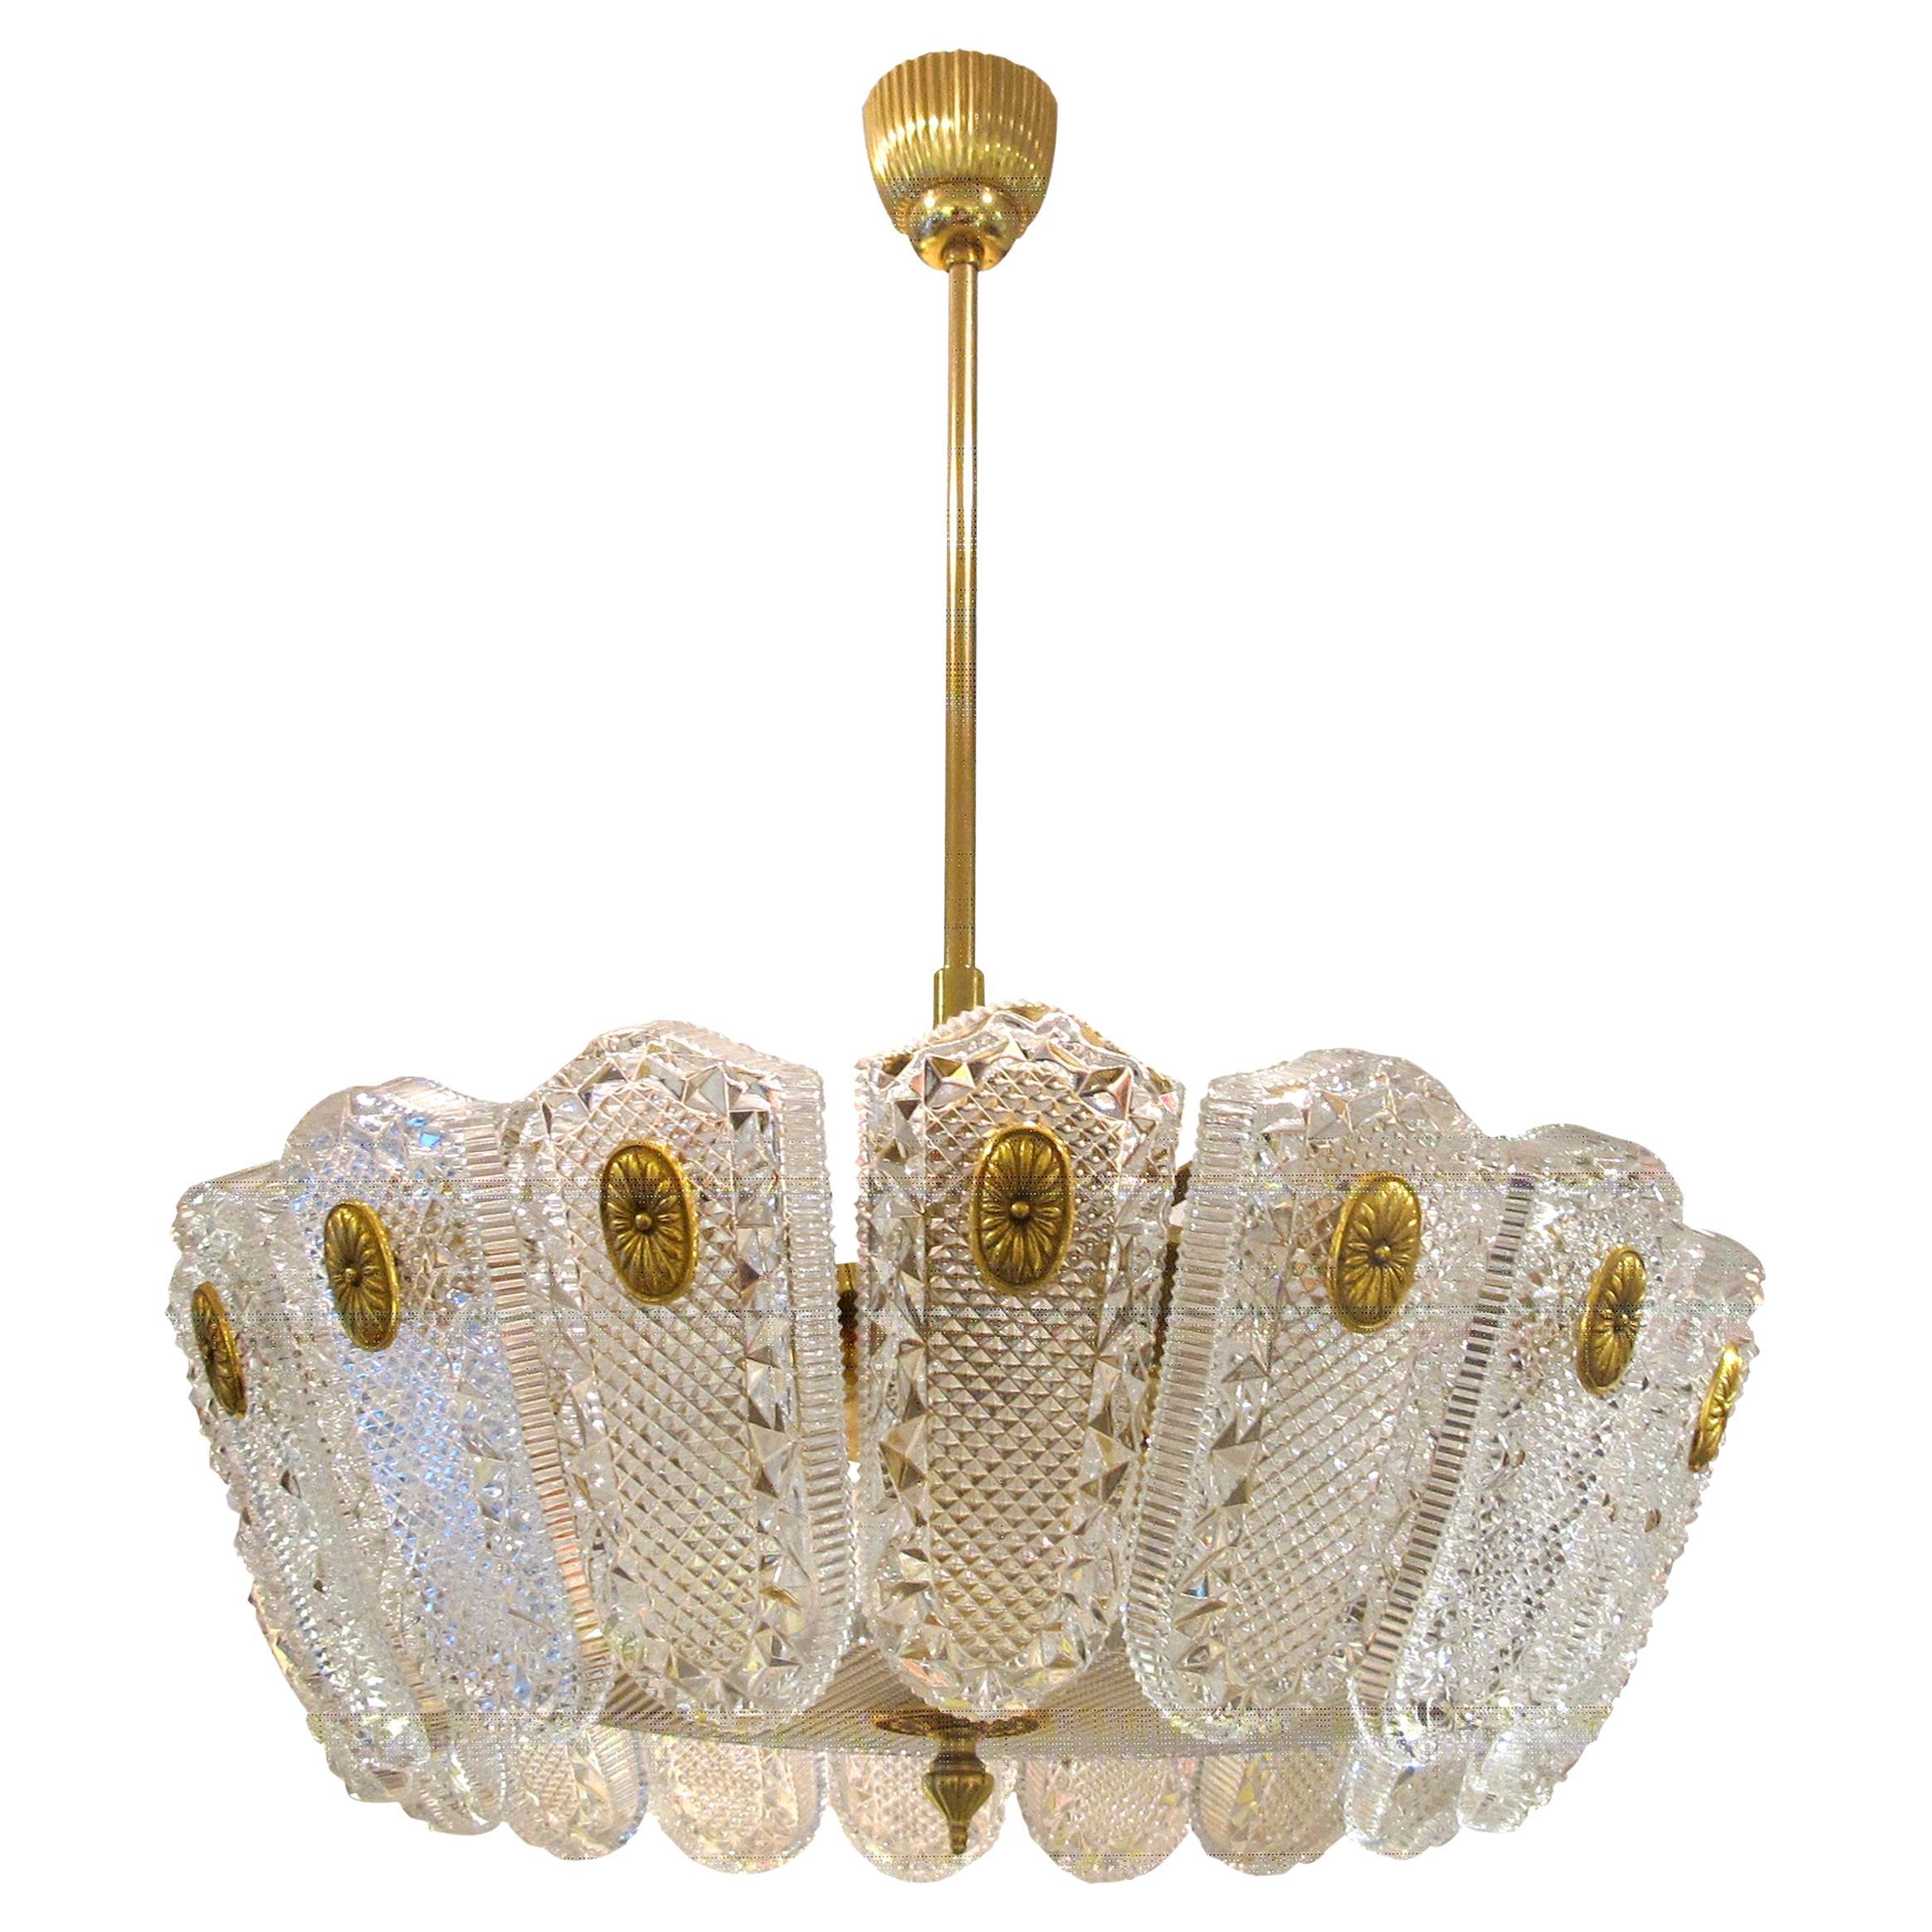 1960S/70S Large Glass and Brass Pendant Light by Orrefors, Swedish